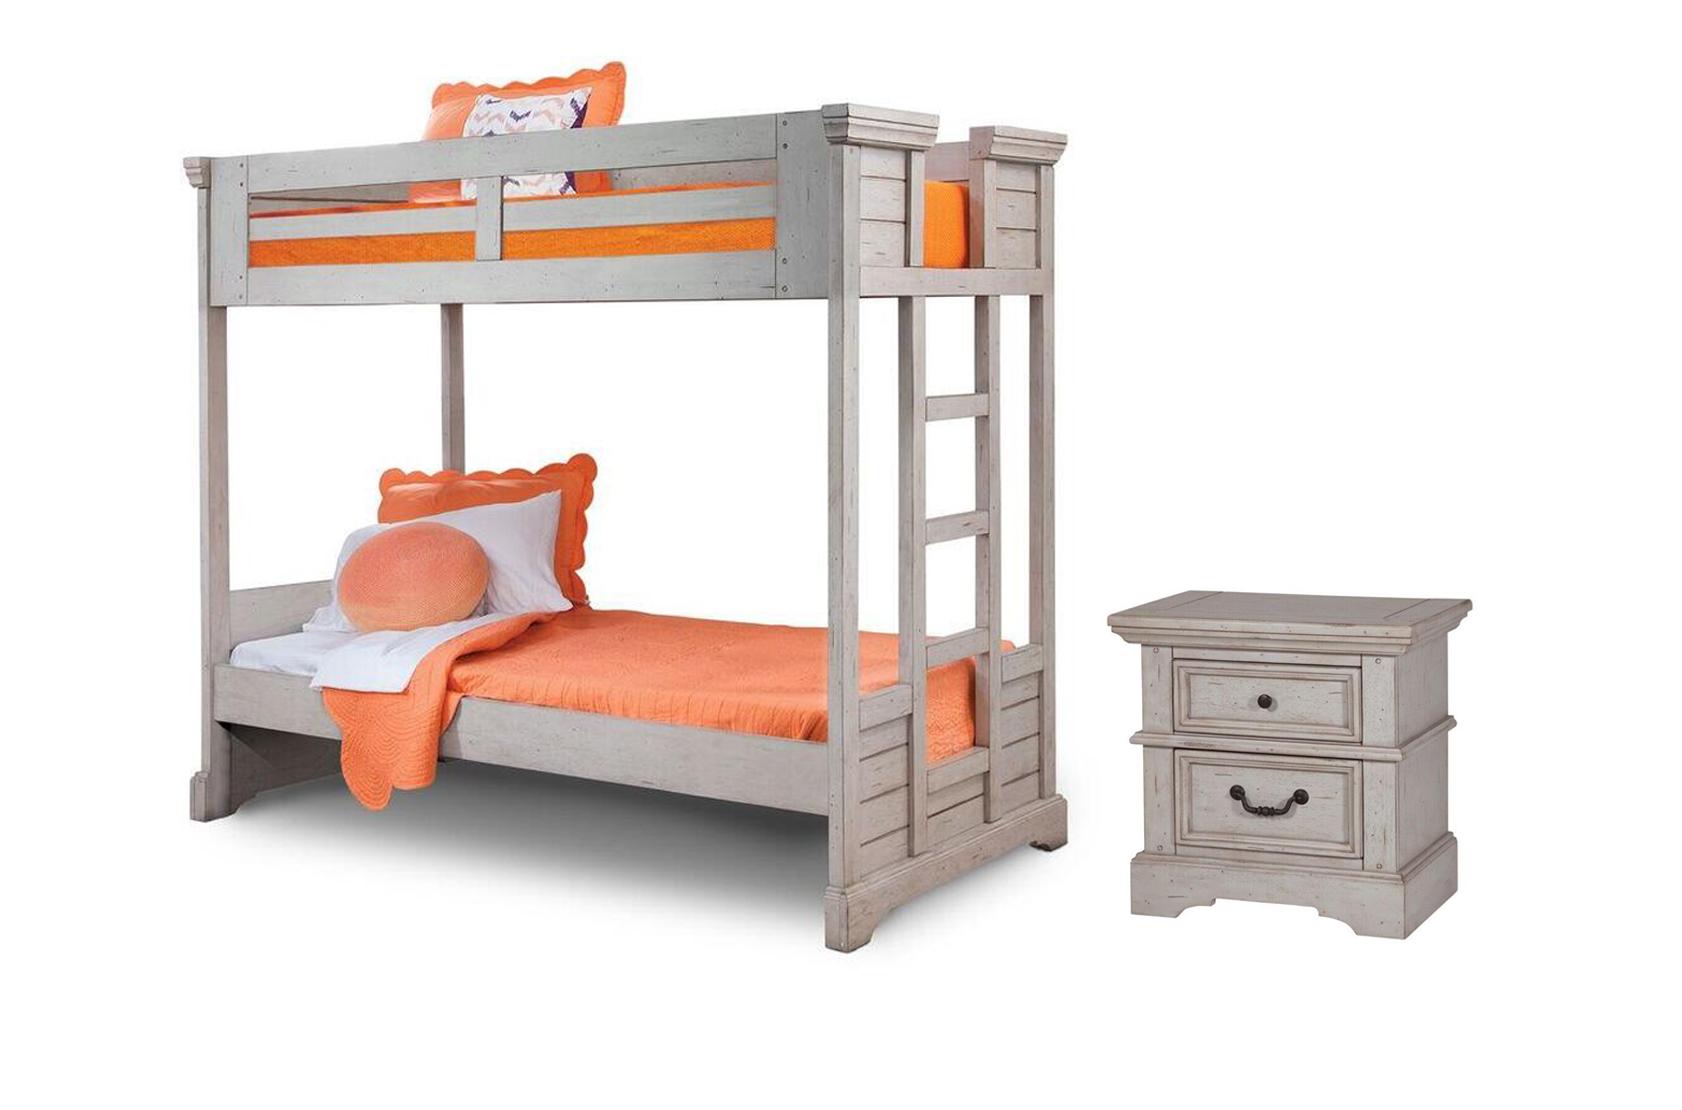 Classic, Traditional Twin Bunk Bed and Nightstand 7820 STONEBROOK 7820-33BNK-N-2PC in Antique, Gray 